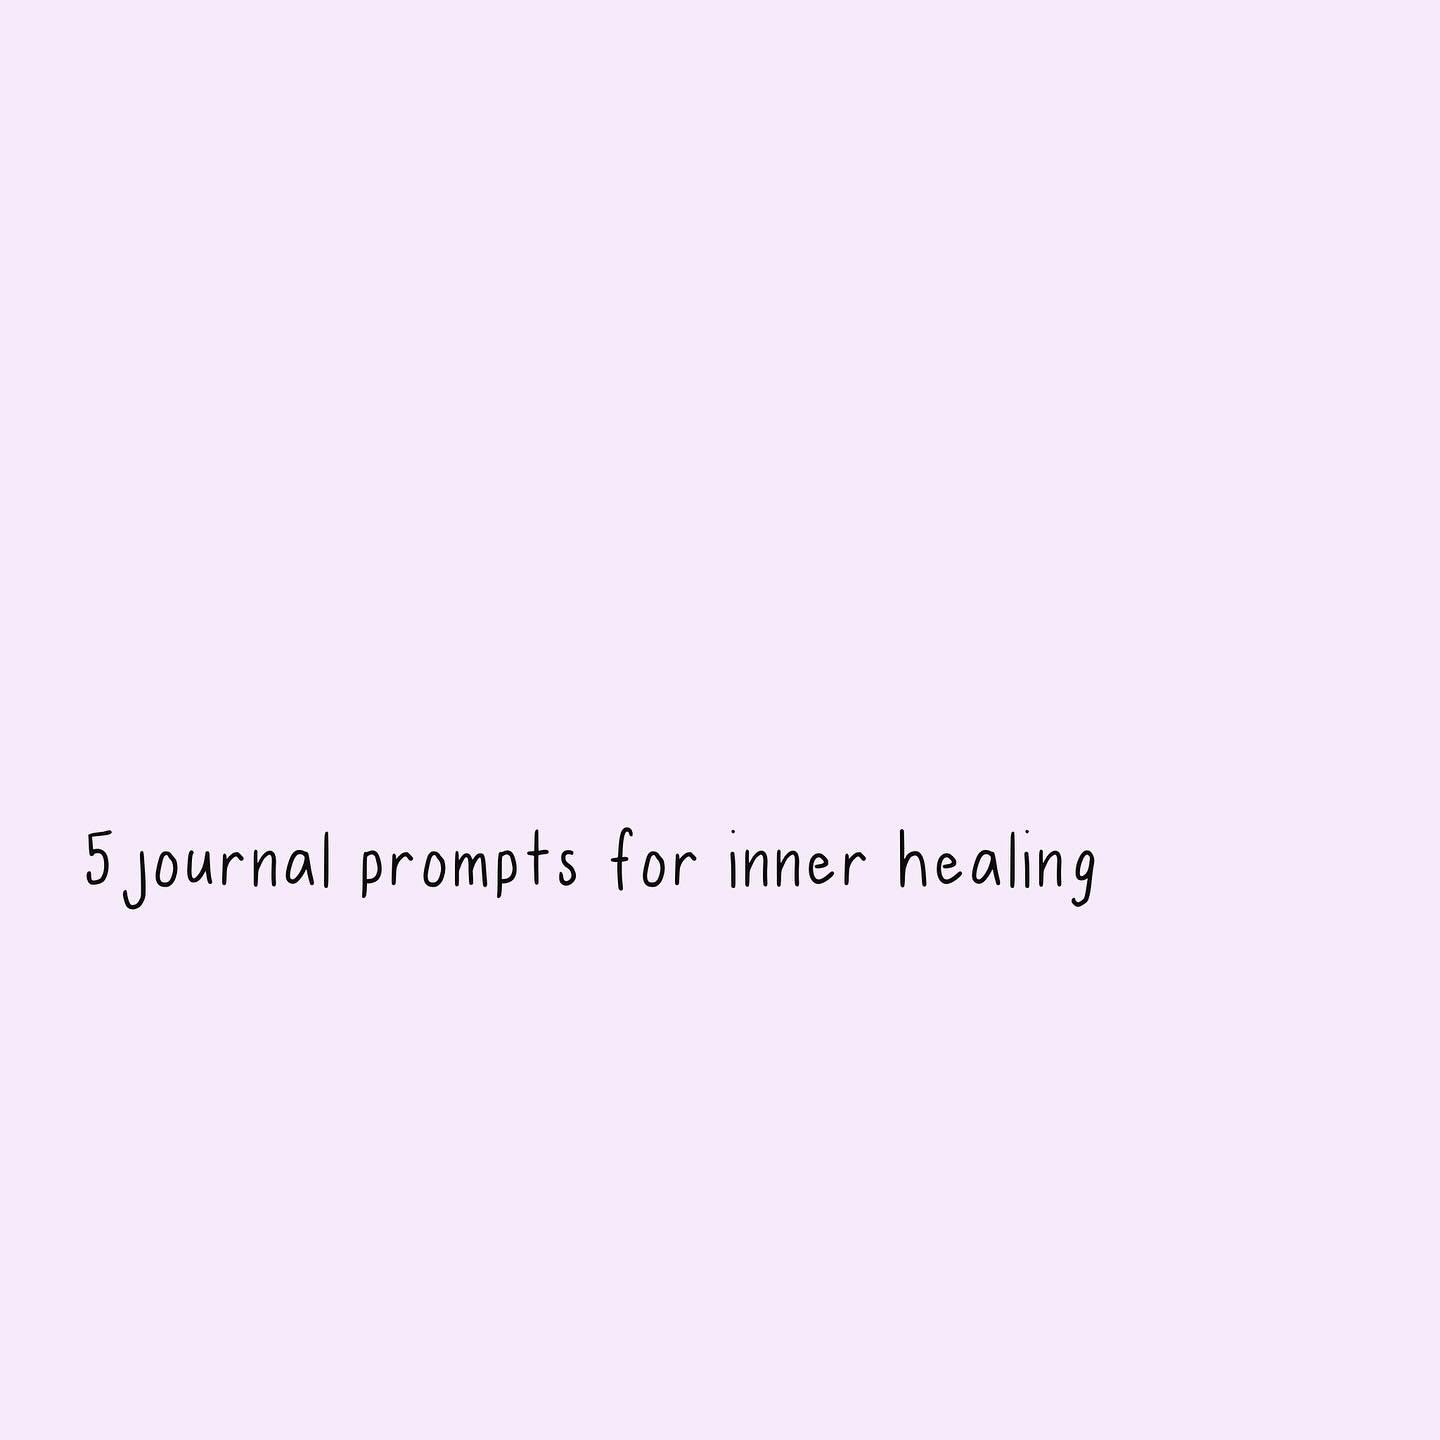 Journal Prompts 

What aspects of my life do I project onto others in unhealthy ways

What is something that I should forgive myself for

How can I be kind to myself in what ways do I unconsciously punish myself or self sabotage

How do I show up for